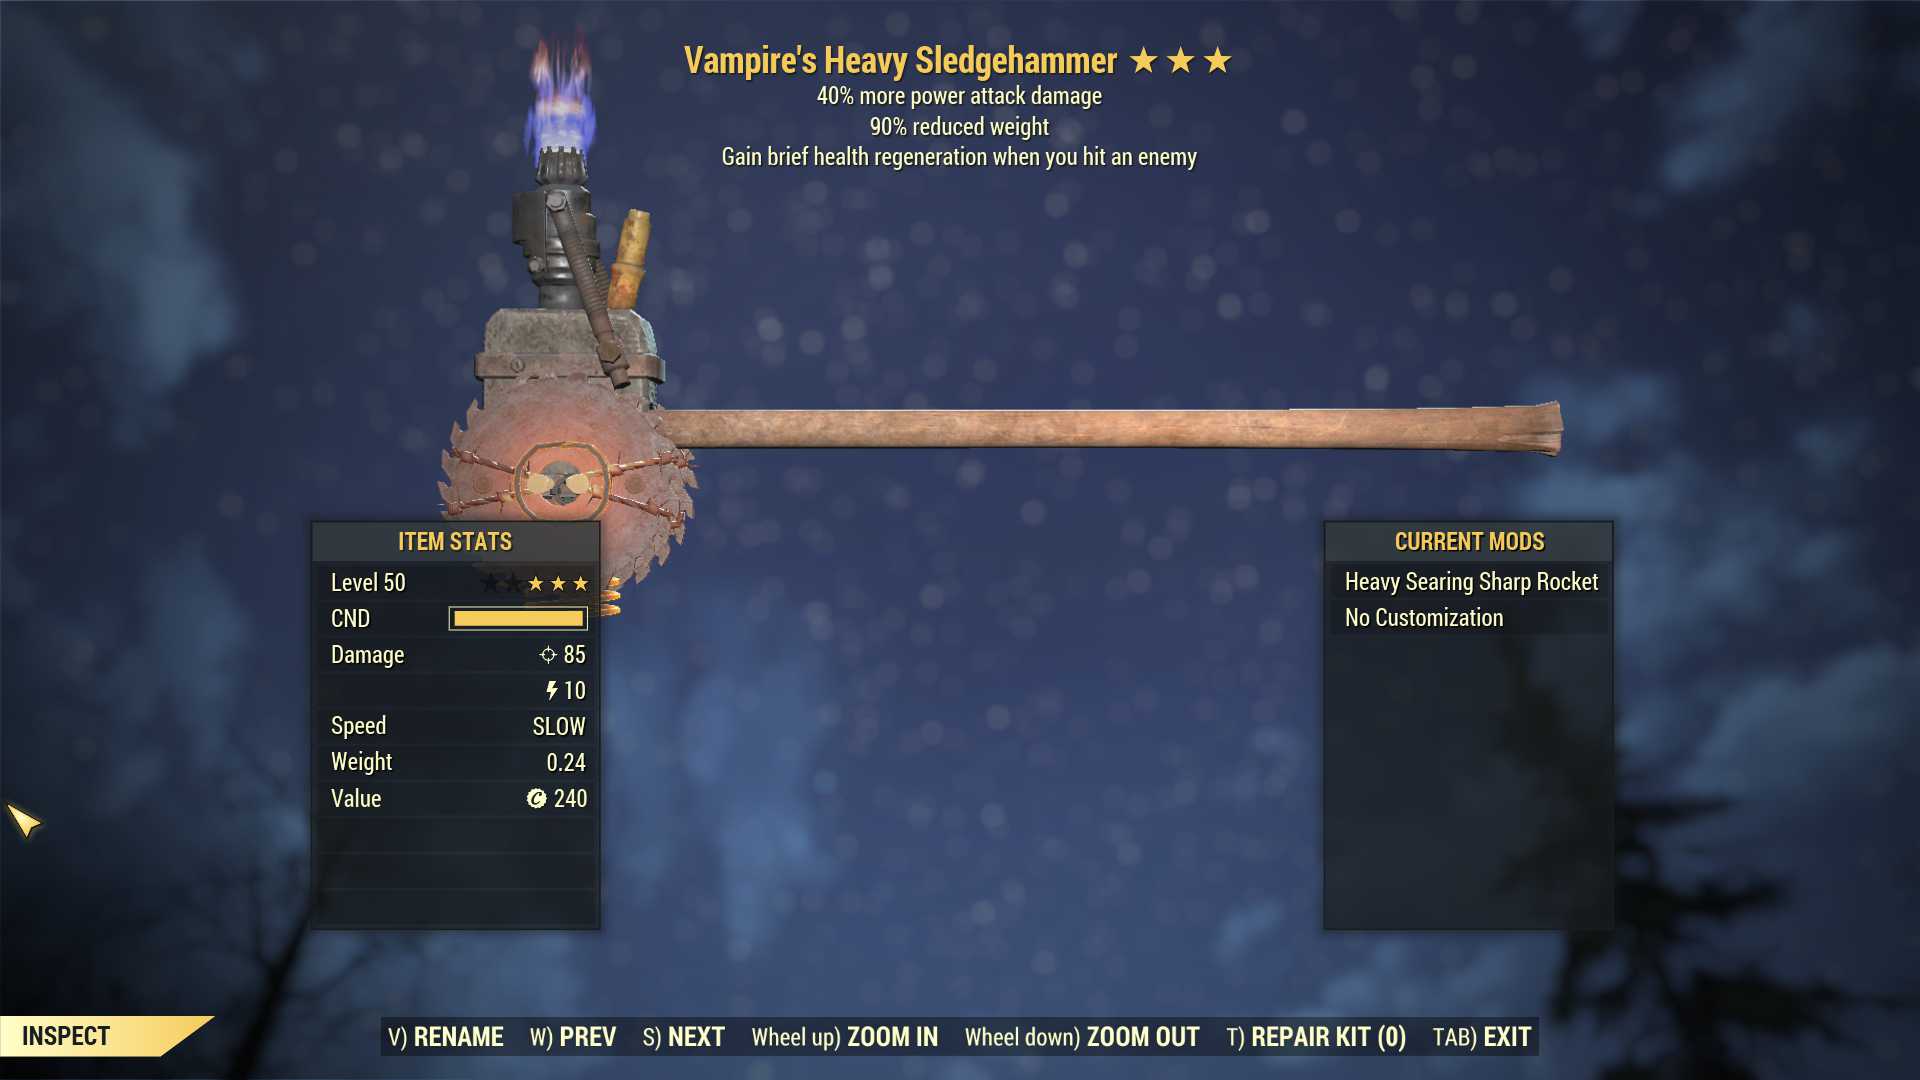 Vampire's Sledgehammer (+40% damage PA, 90% reduced weight)